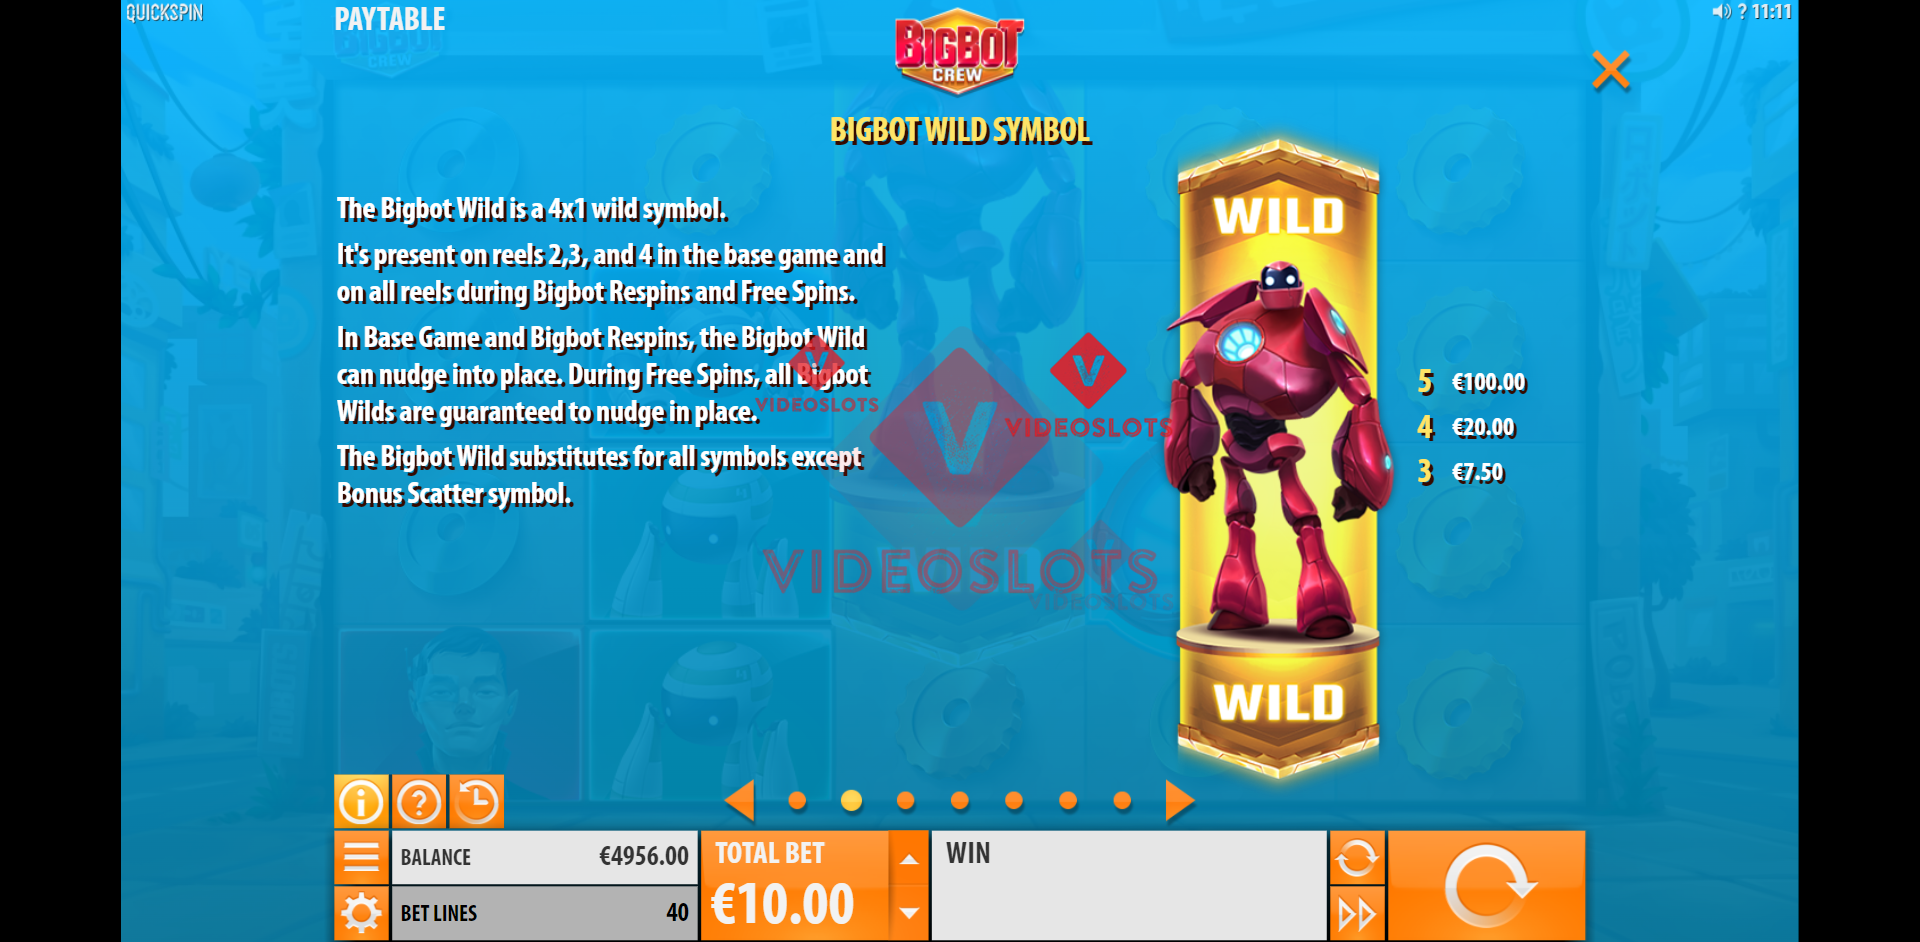 Pay Table and Game Info for Big Bot Crew slot from Quickspin